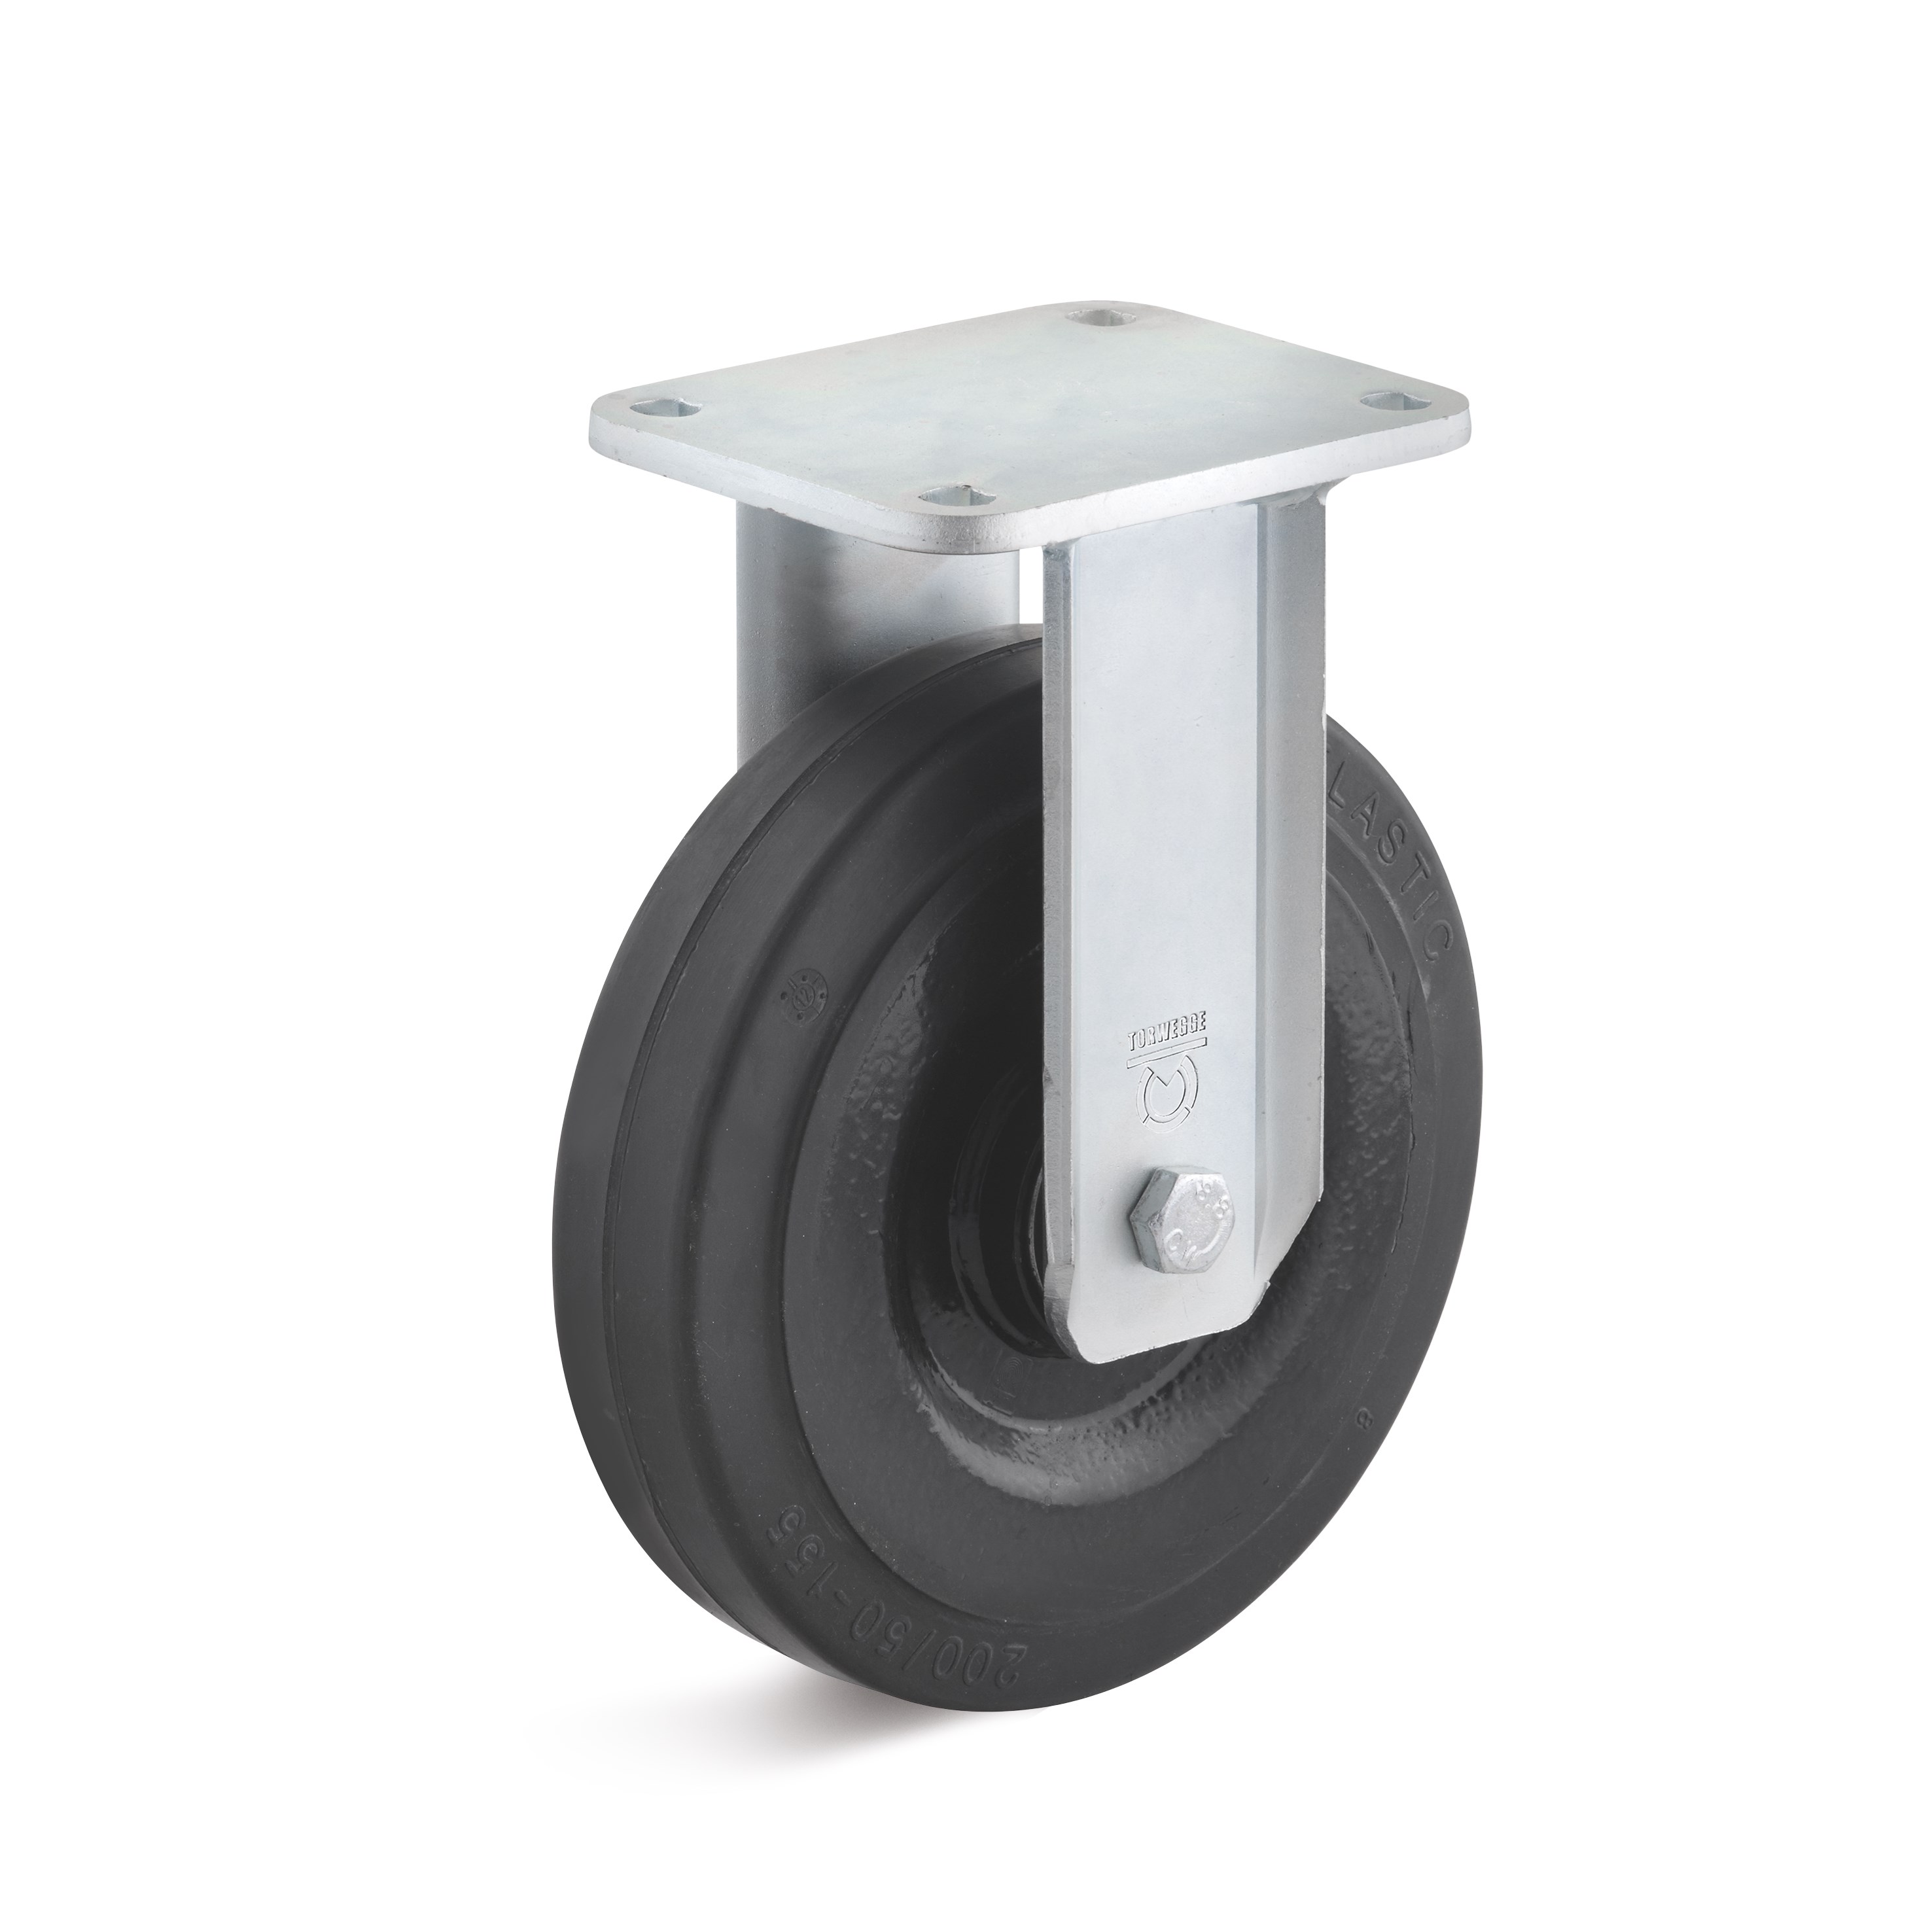 Heavy duty fixed castor with elastic solid rubber wheel, welded steel construction